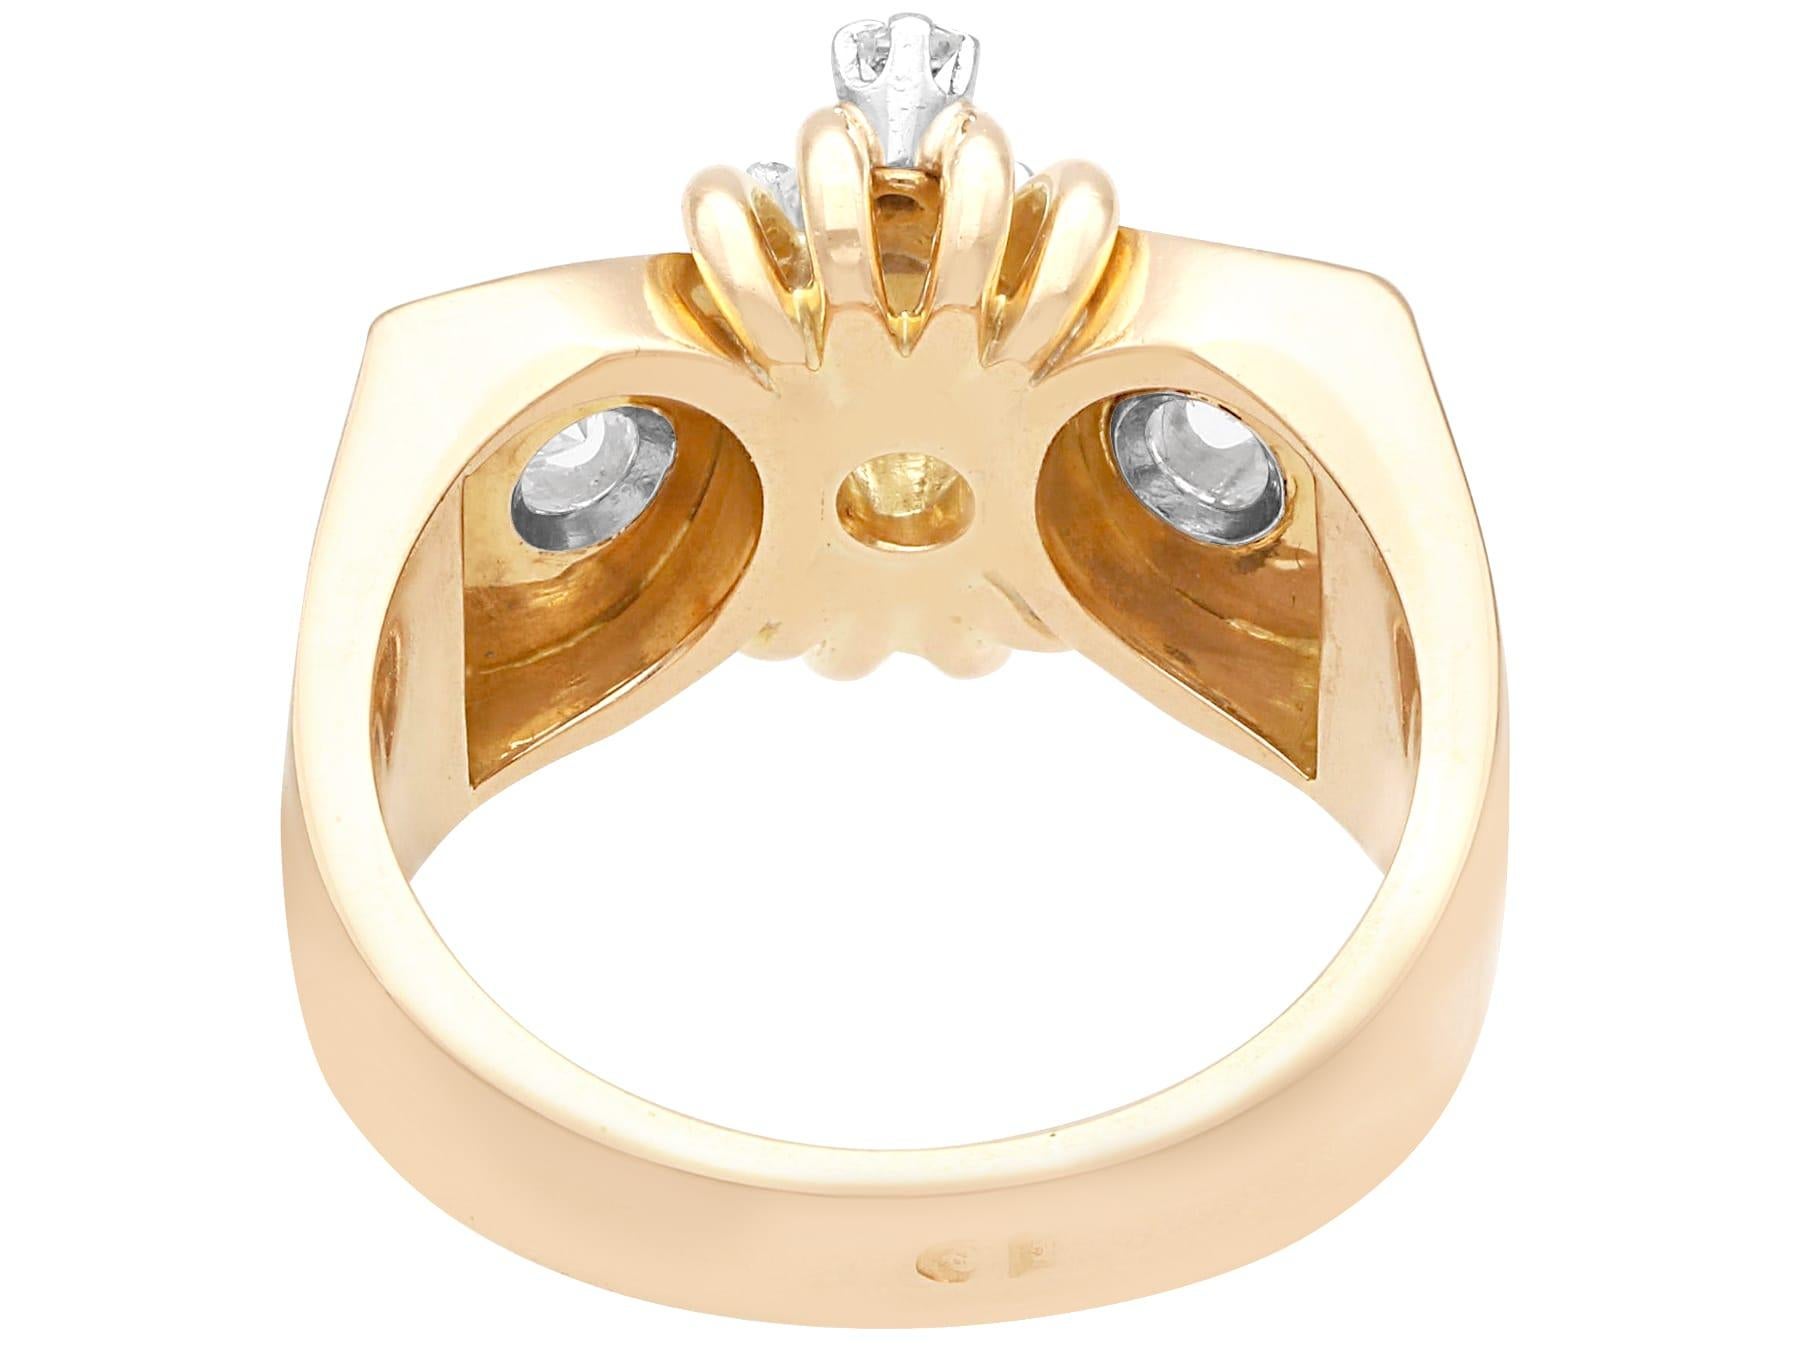 This stunning, fine and impressive vintage diamond ring has been crafted in 18k rose gold with platinum settings.

The substantial feature elevated claw setting displays a 0.52ct Old European round cut diamond, in relief to the center.

This central